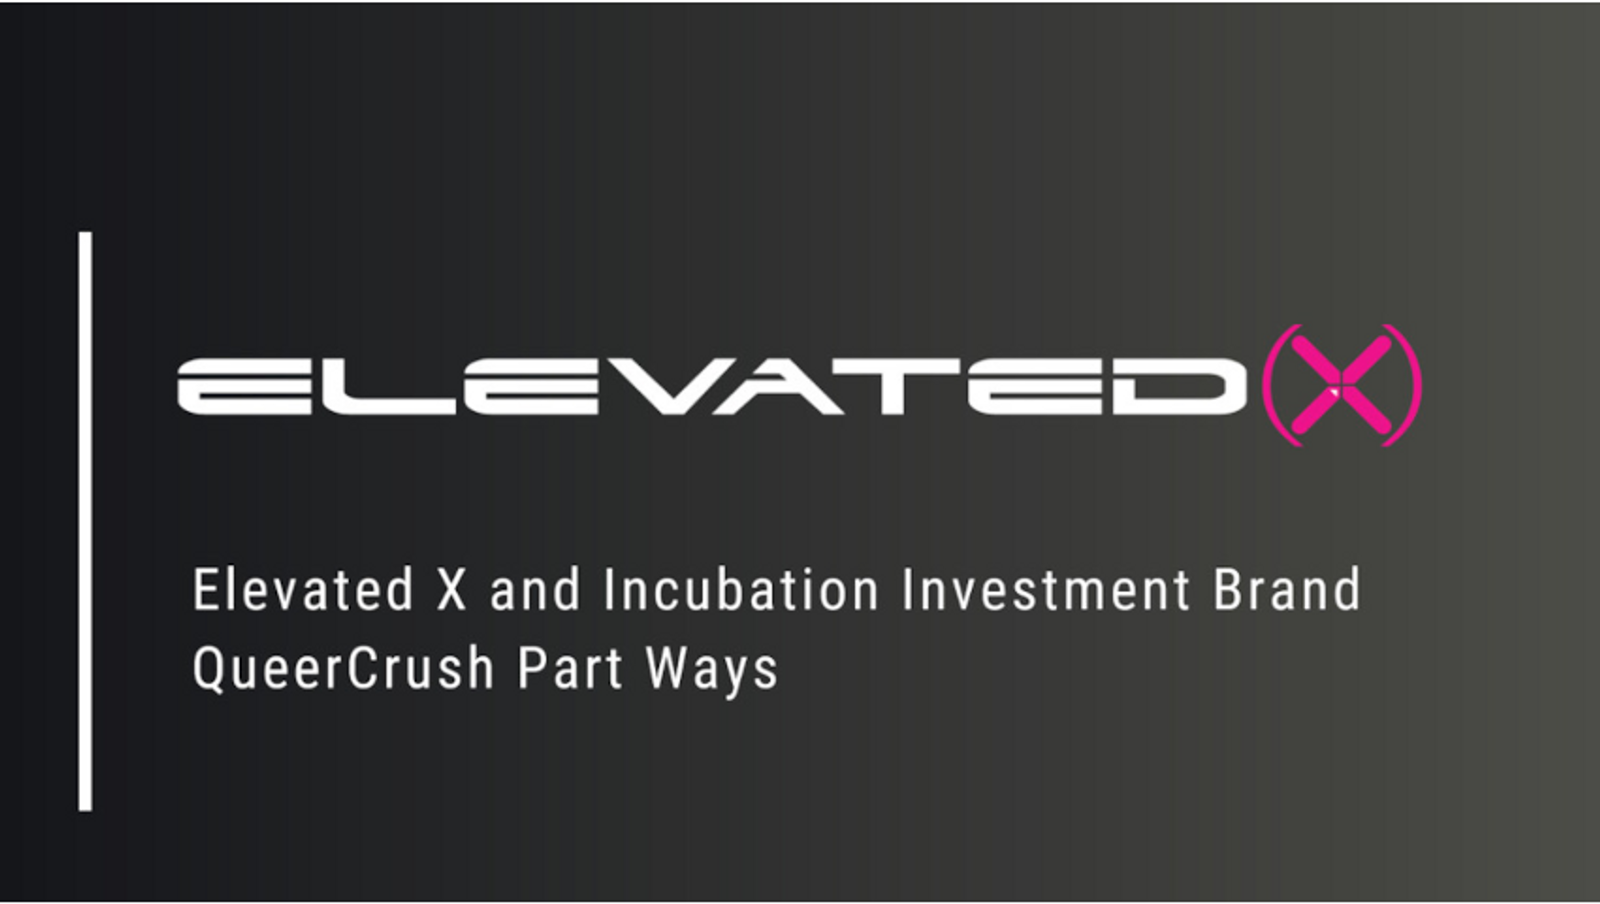 Elevated X, Incubation Investment Brand QueerCrush Part Ways